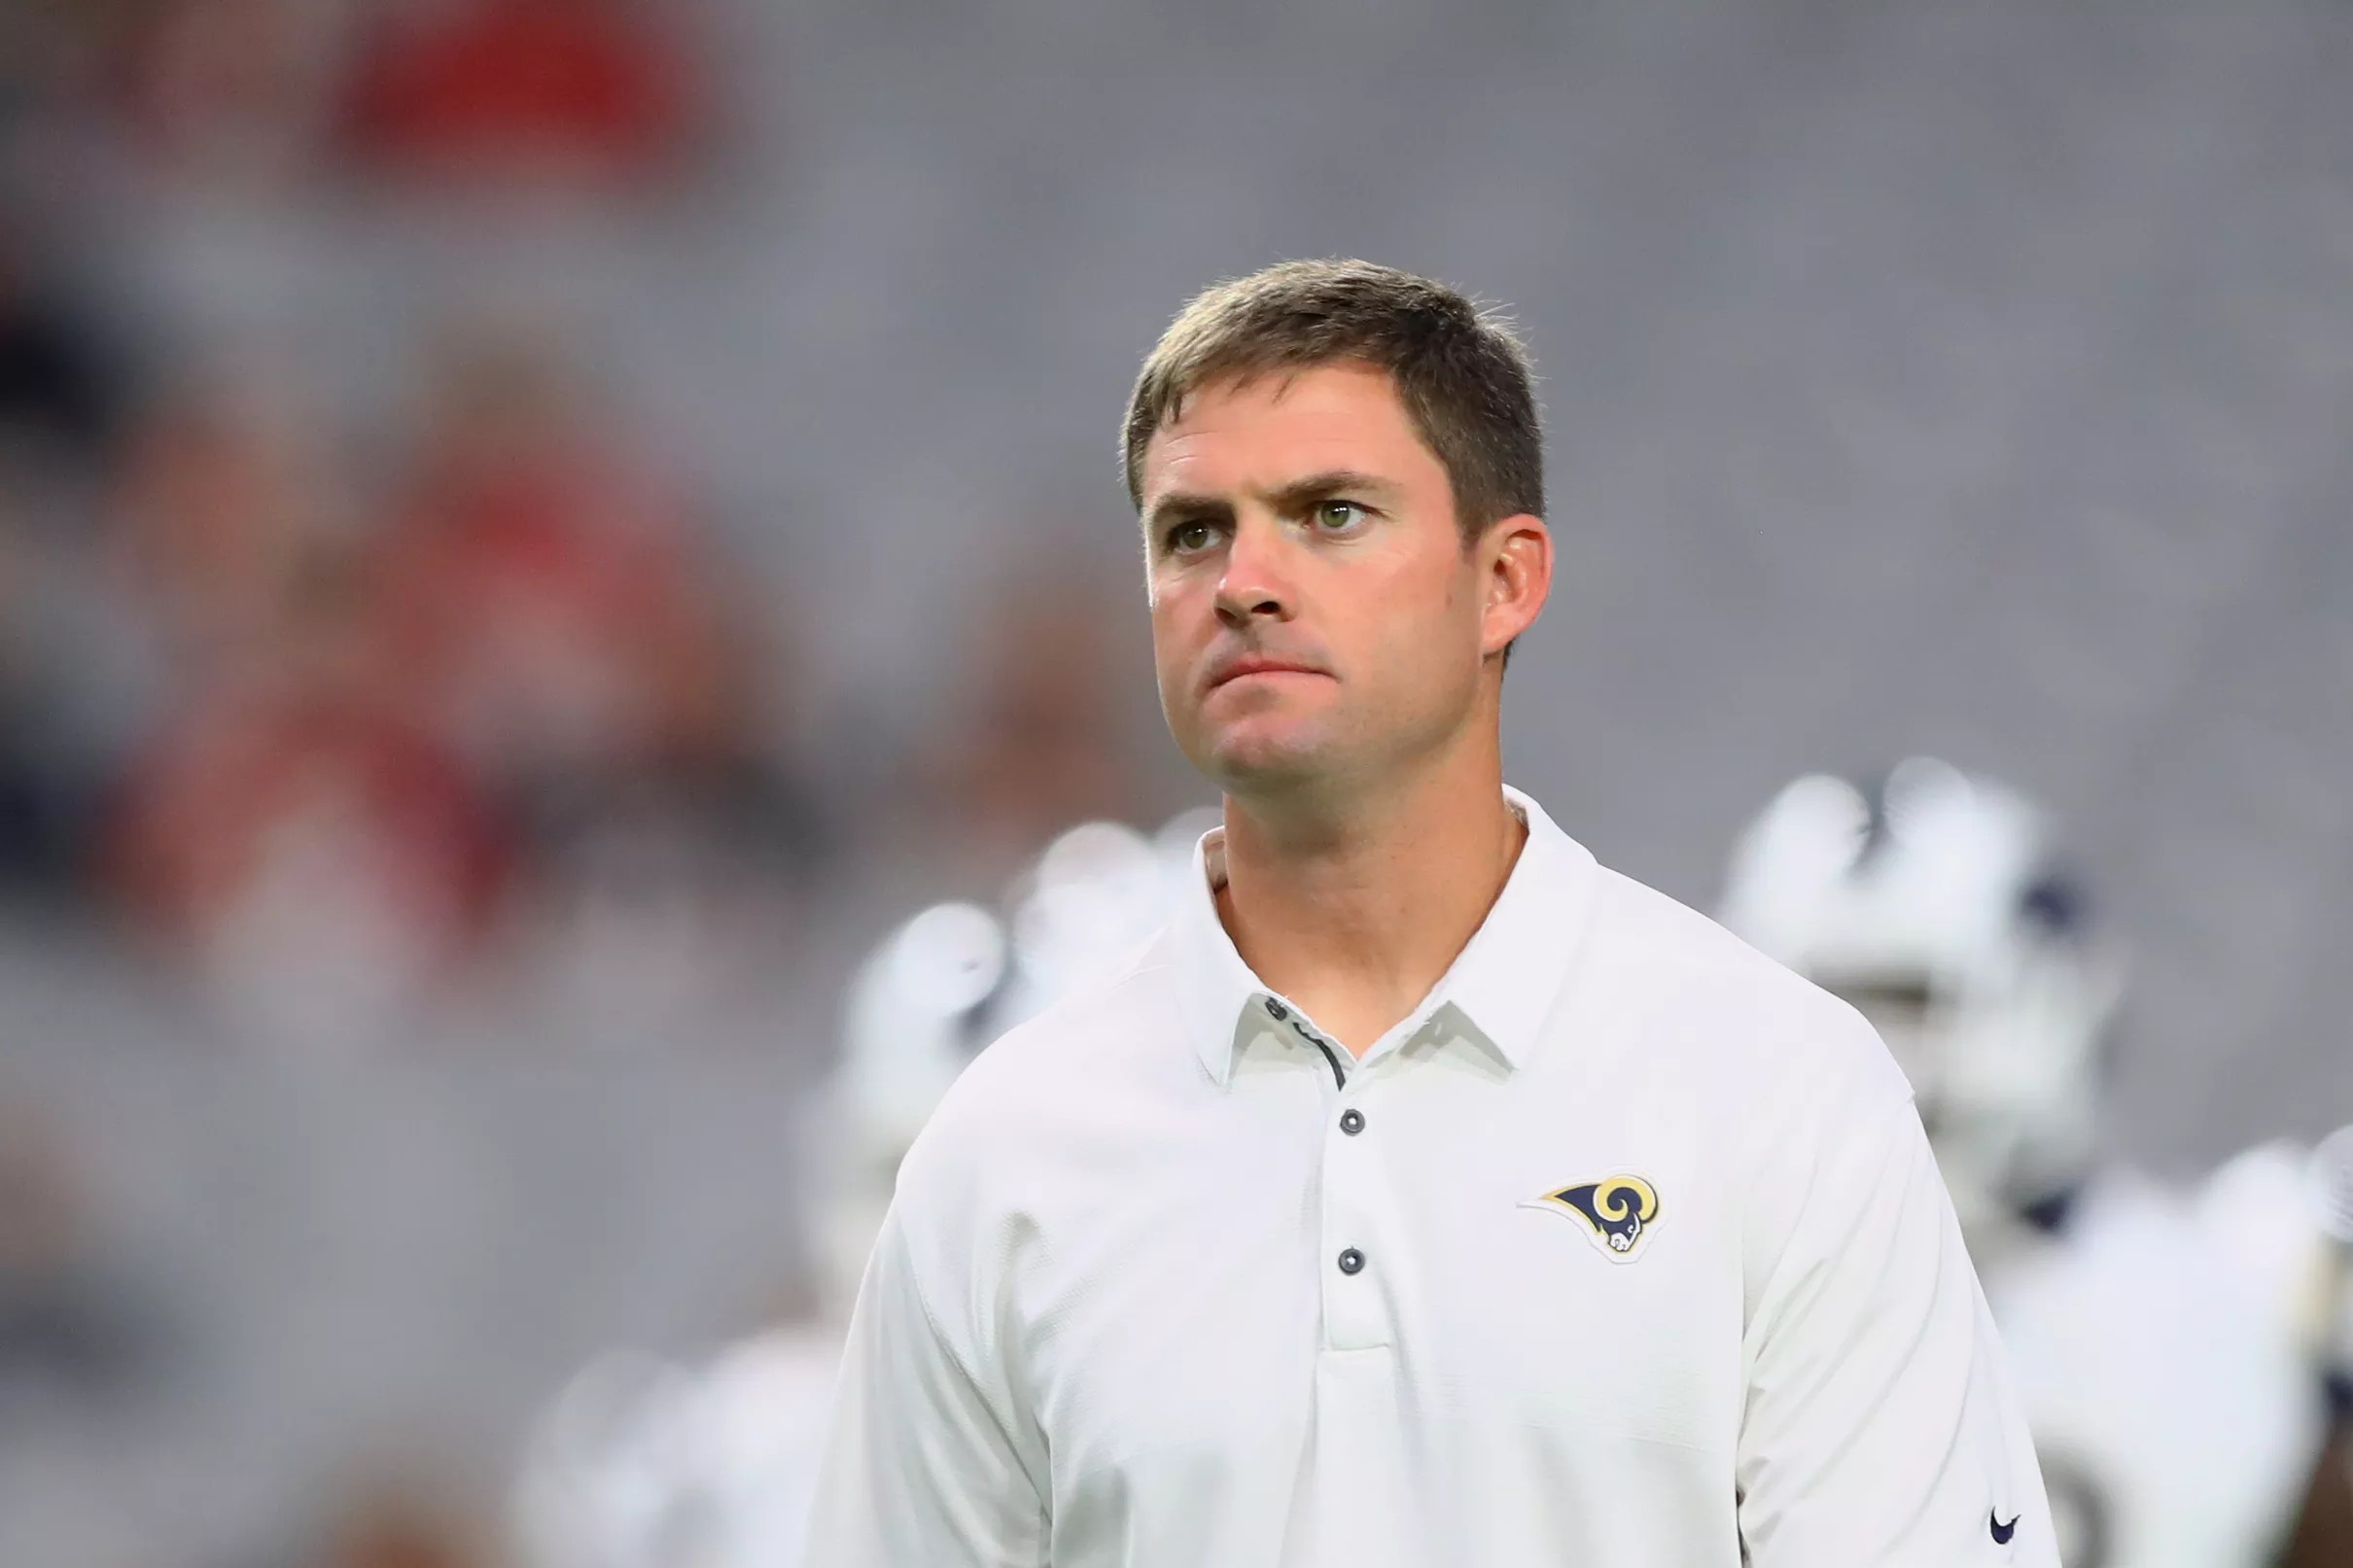 Former Nebraska QB Zac Taylor Being Considered for NFL Head Coaching Openings